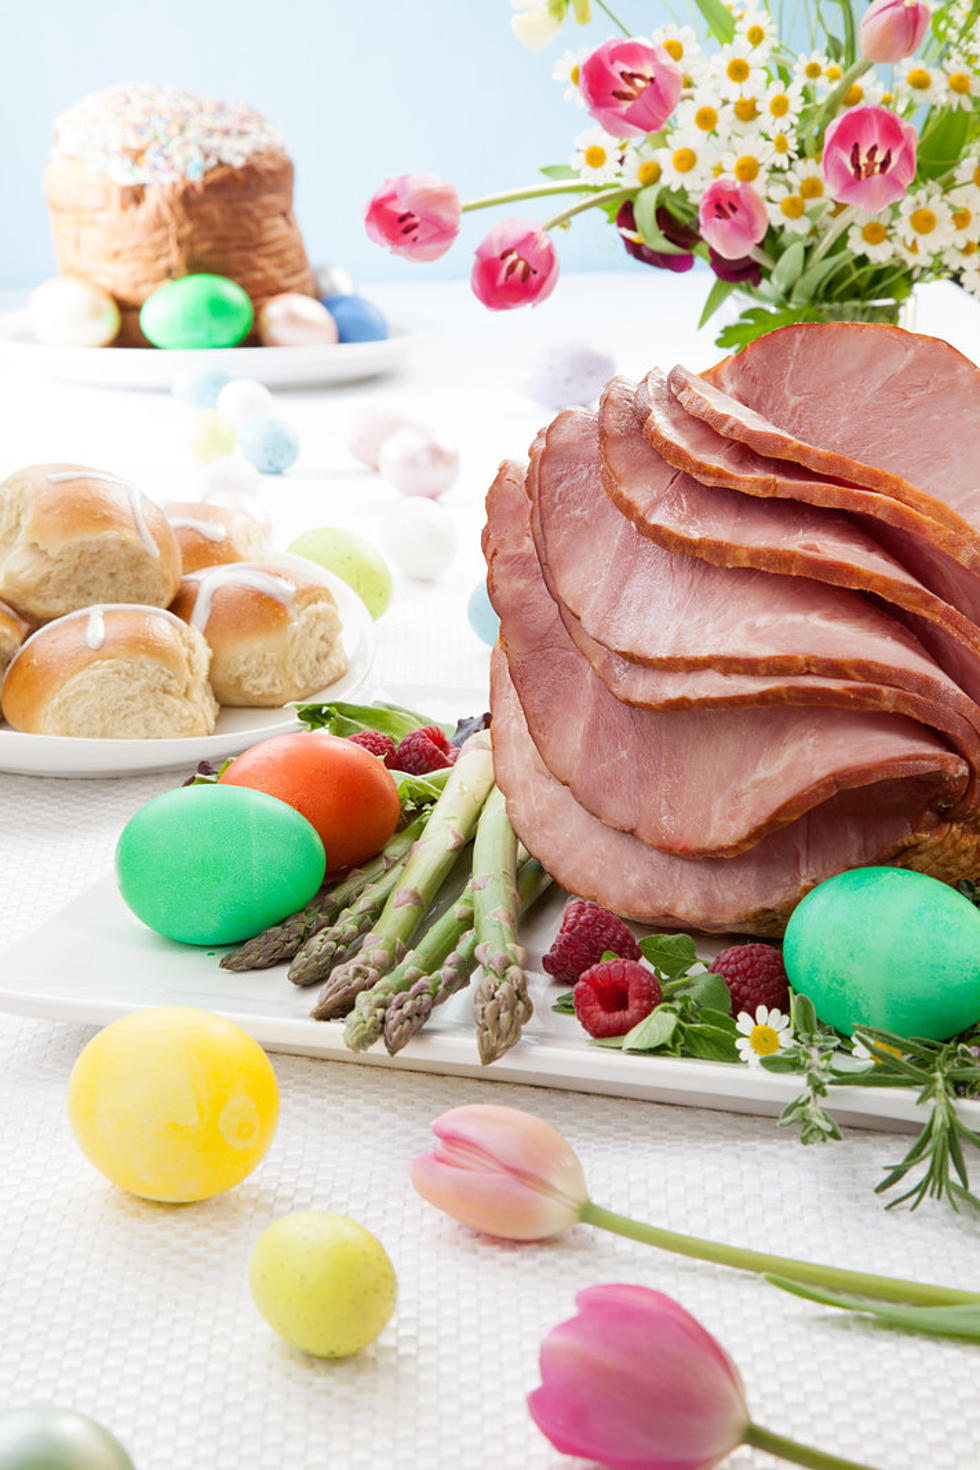 Will Easter Dinner Cost More This Year? Let's Find Out